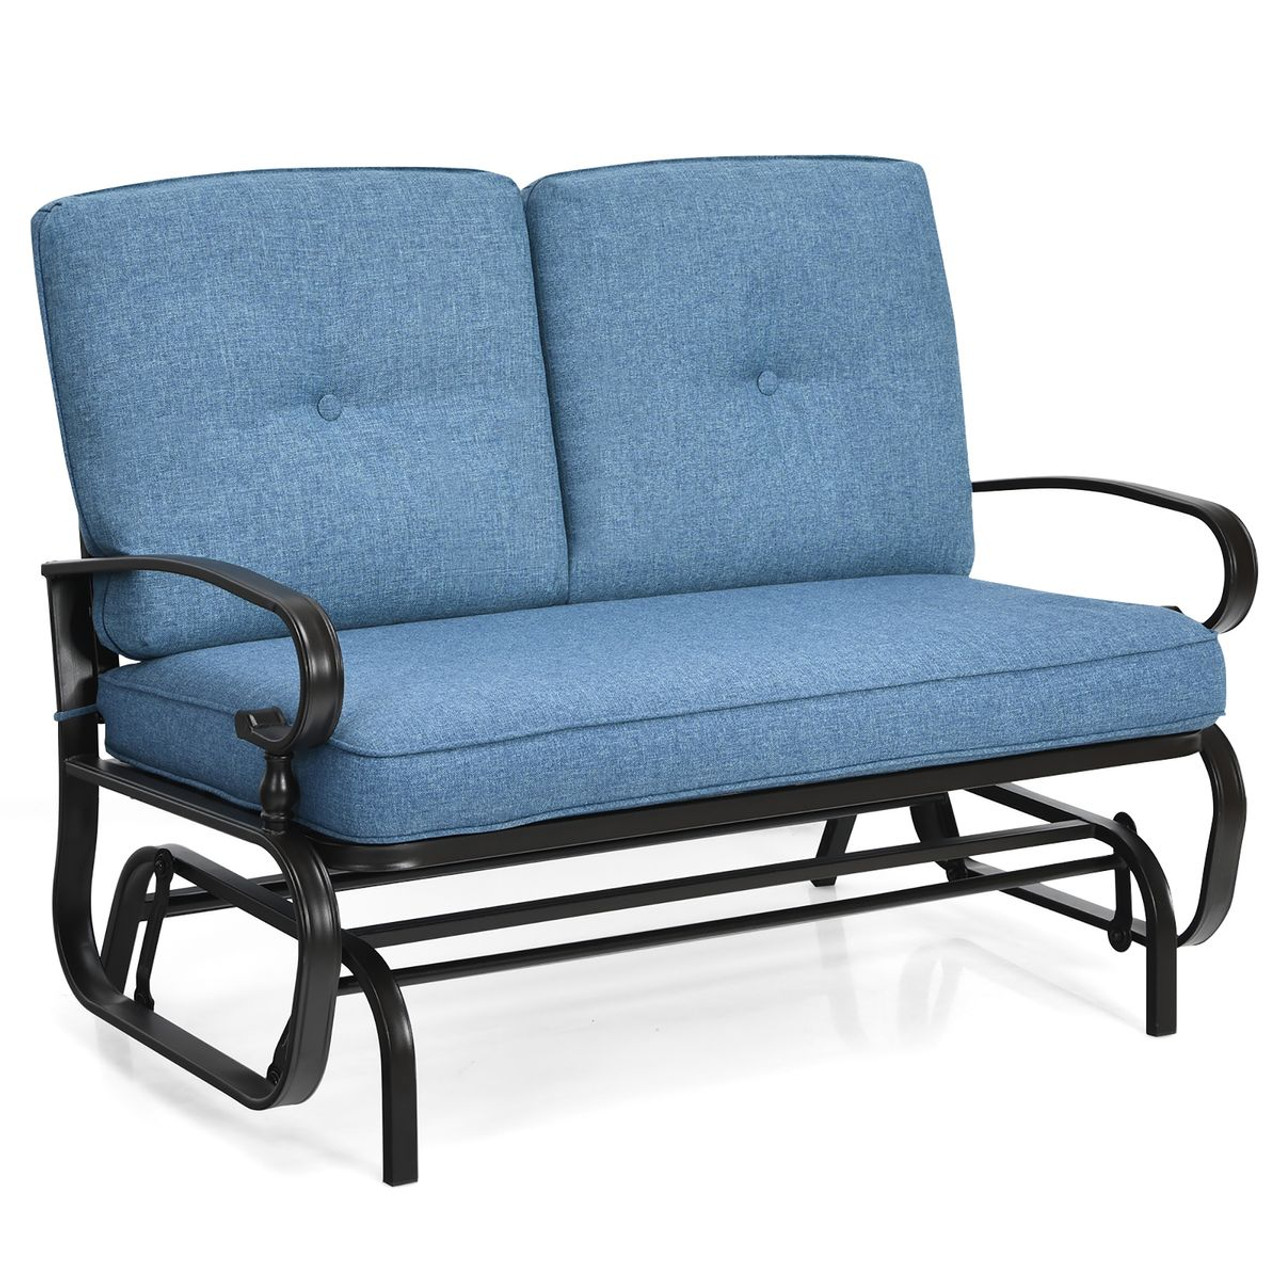 Outdoor Patio Cushioned Rocking Bench Loveseat product image